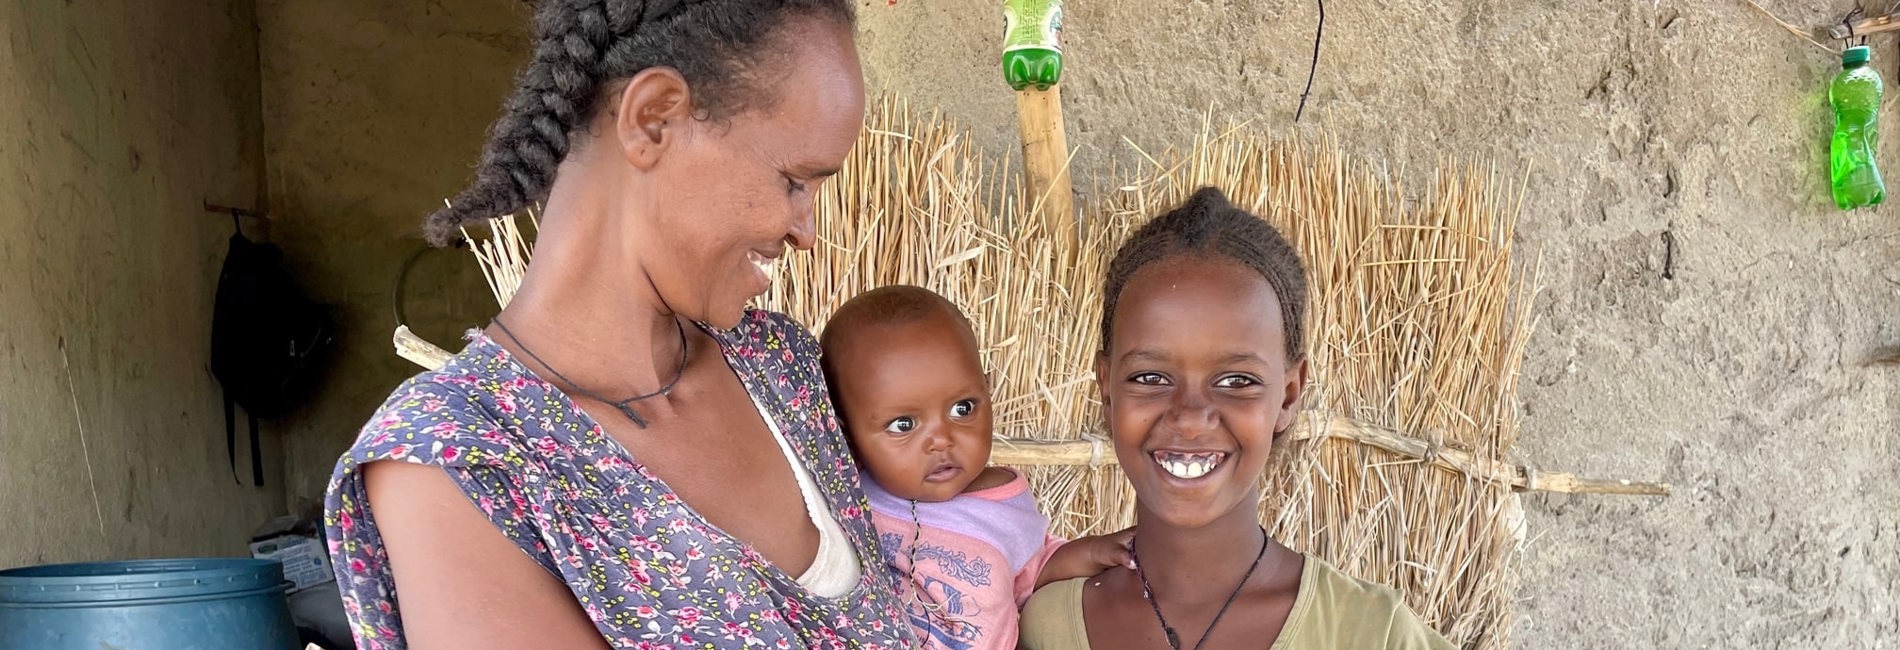 Letha and her daughter Eymaret are all smiles after being reunited following months of separation due to the conflict in northern Ethiopia.